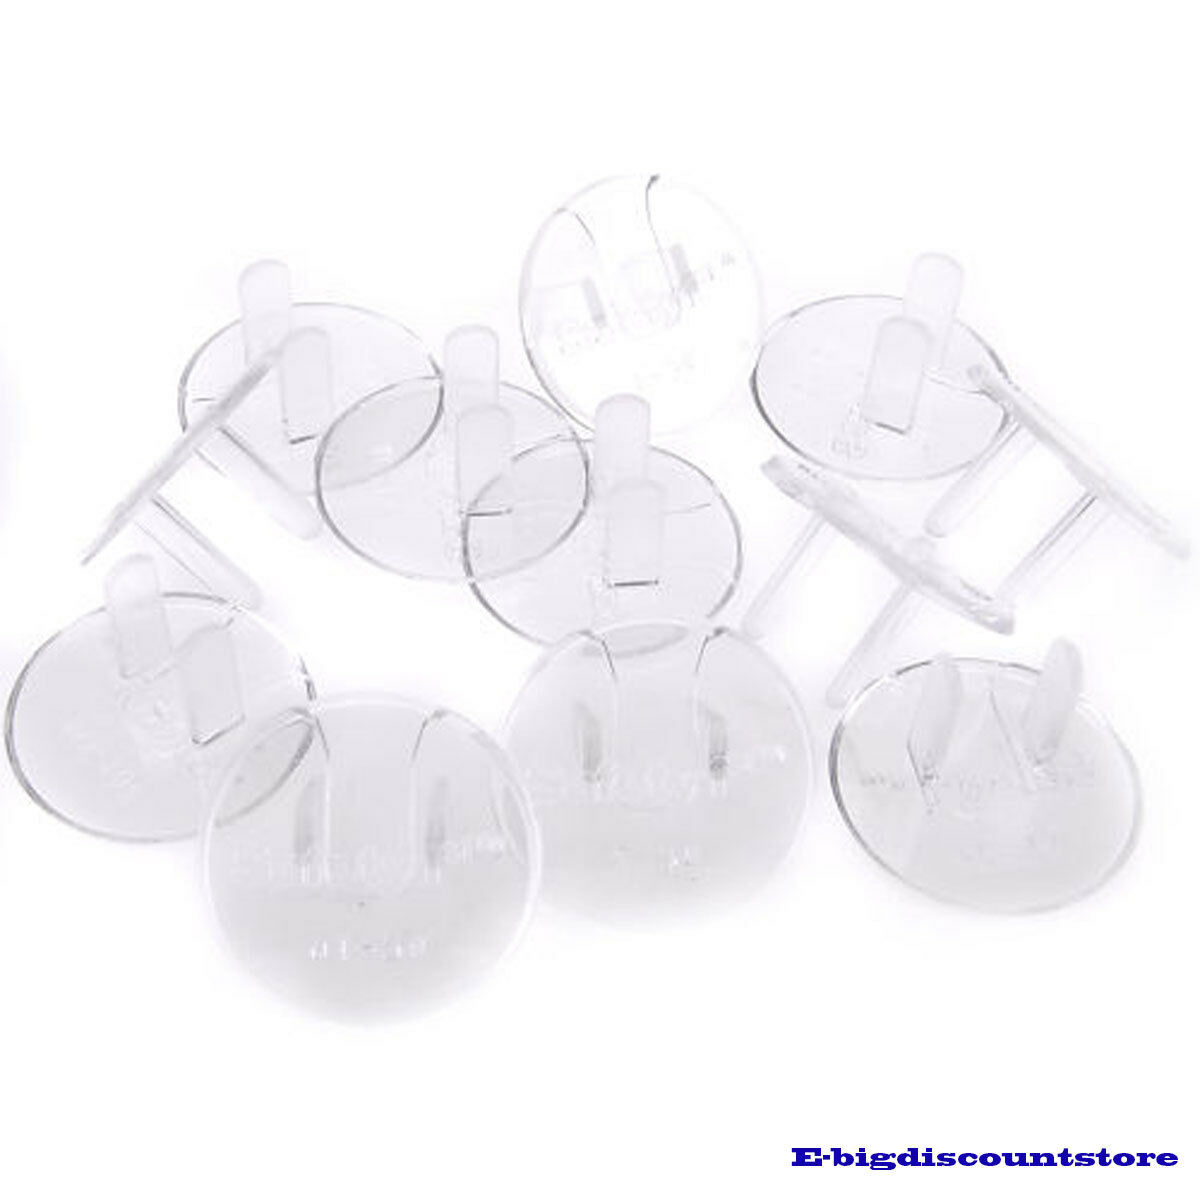 24 Pcs Safety Outlet Plug Protector Covers Child Baby Proof Electric Shock Guard